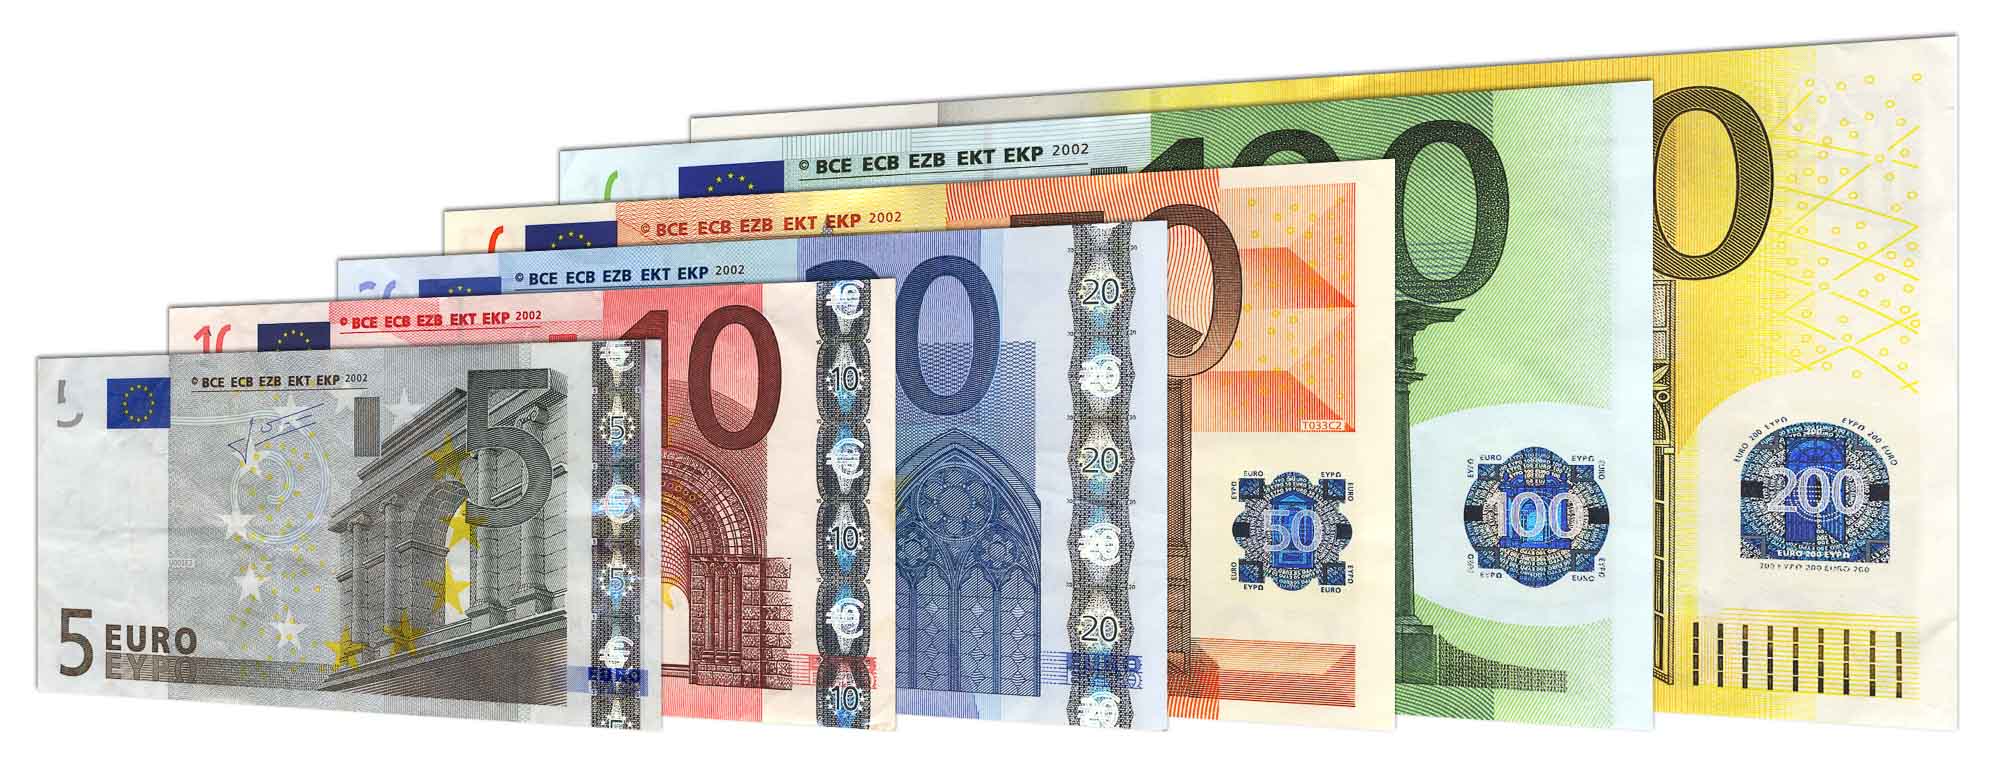 Other European banknote